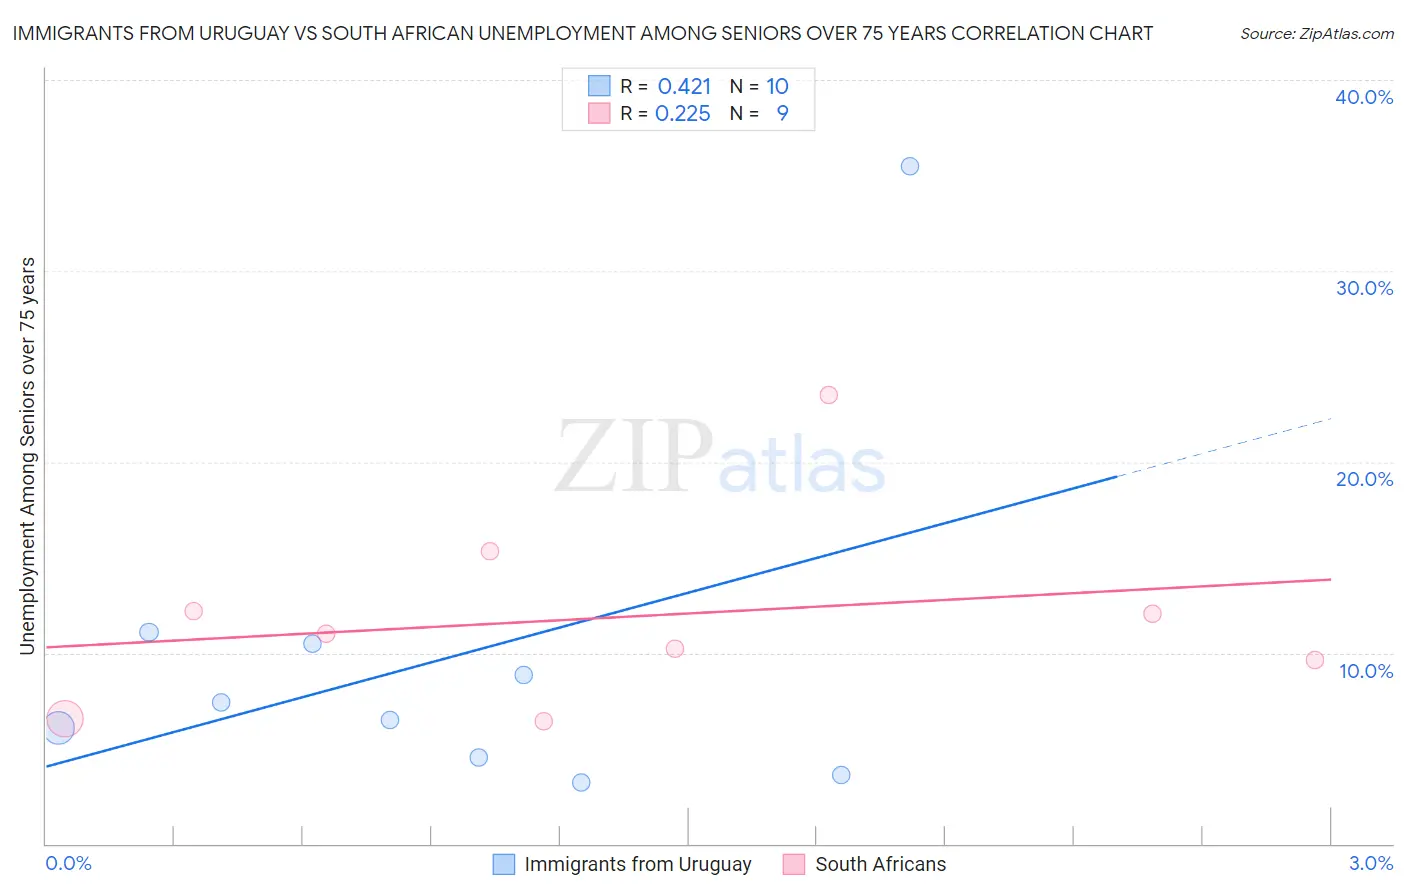 Immigrants from Uruguay vs South African Unemployment Among Seniors over 75 years